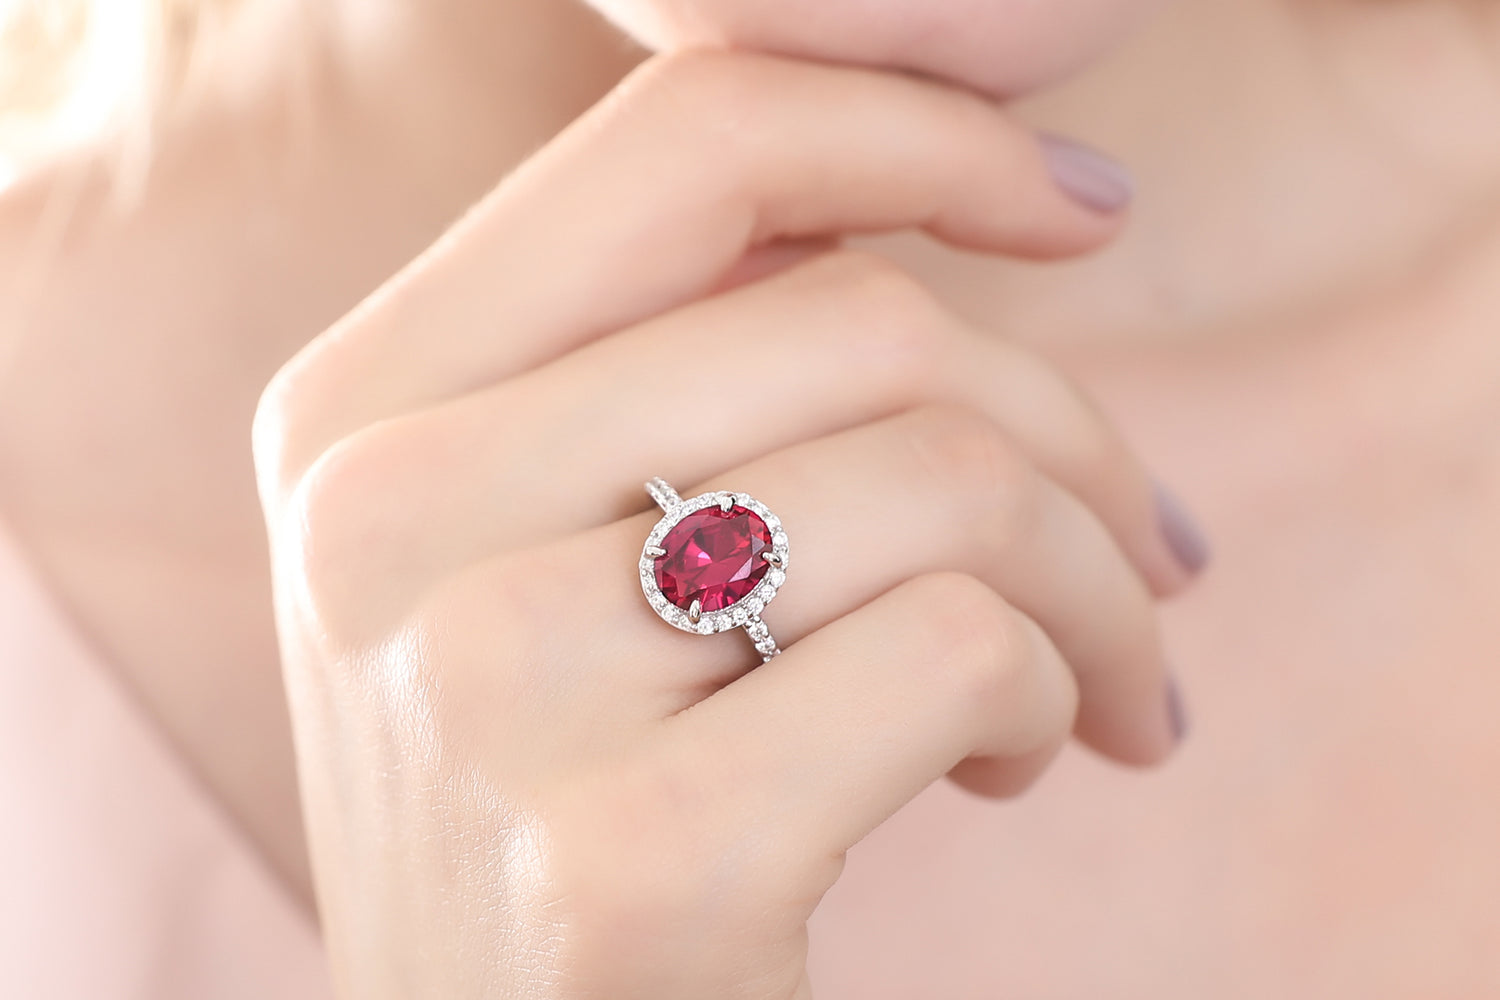 8. Simulated Ruby Engagement Ring